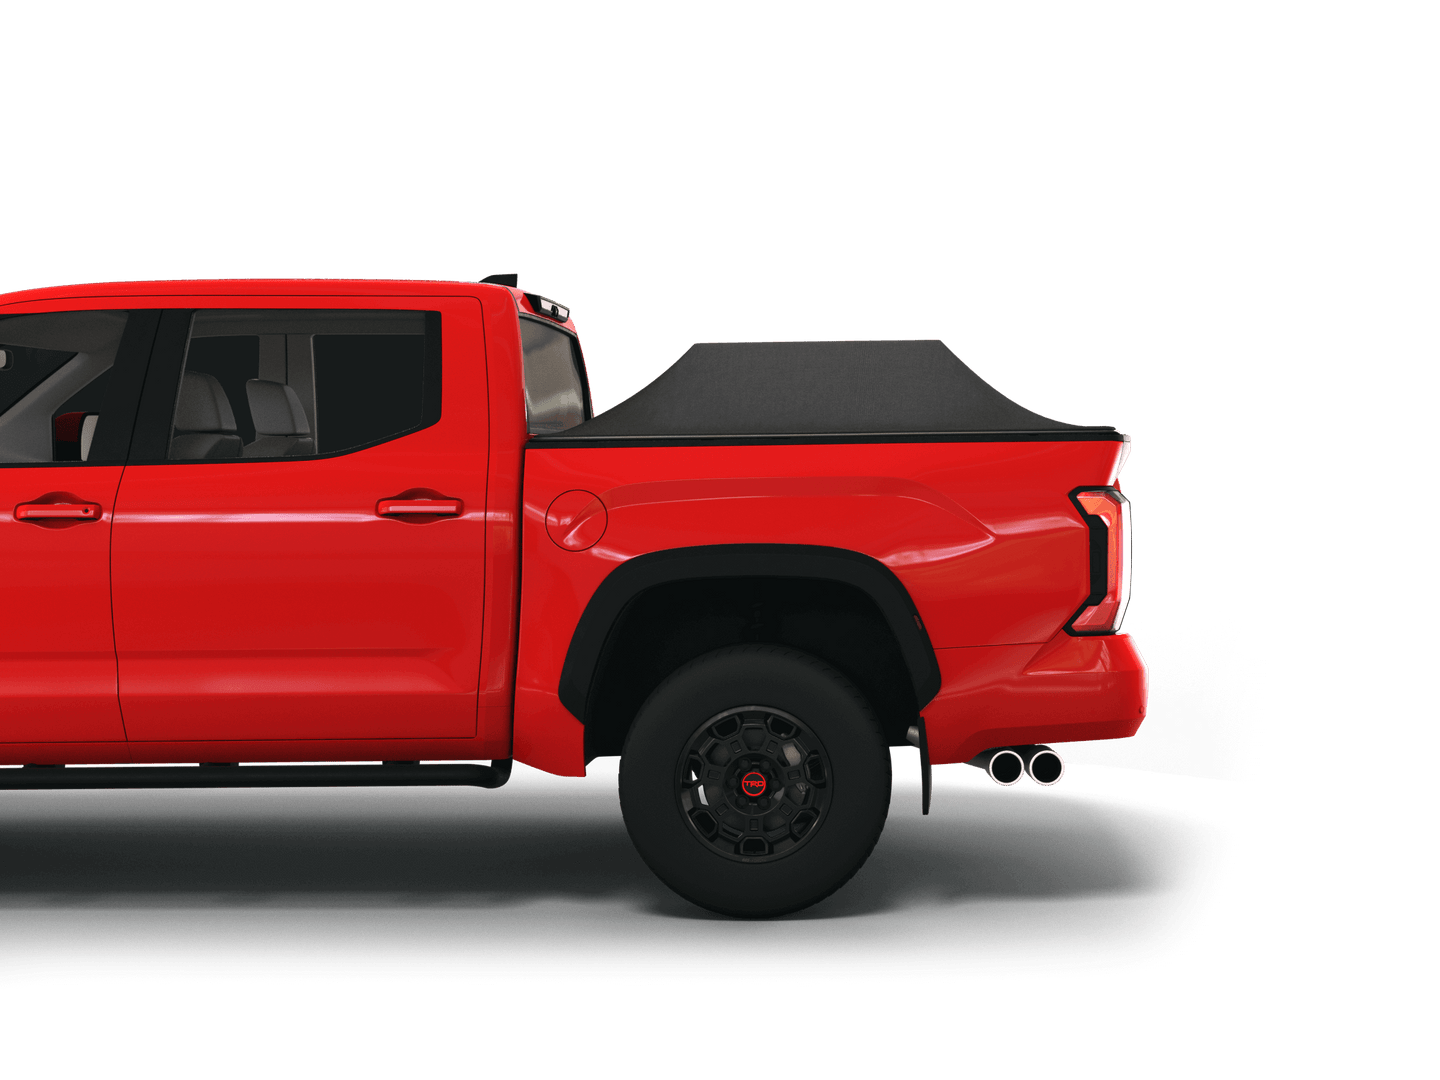 Red Toyota Tundra with Sawtooth Stretch tonneau cover expanded over cargo load